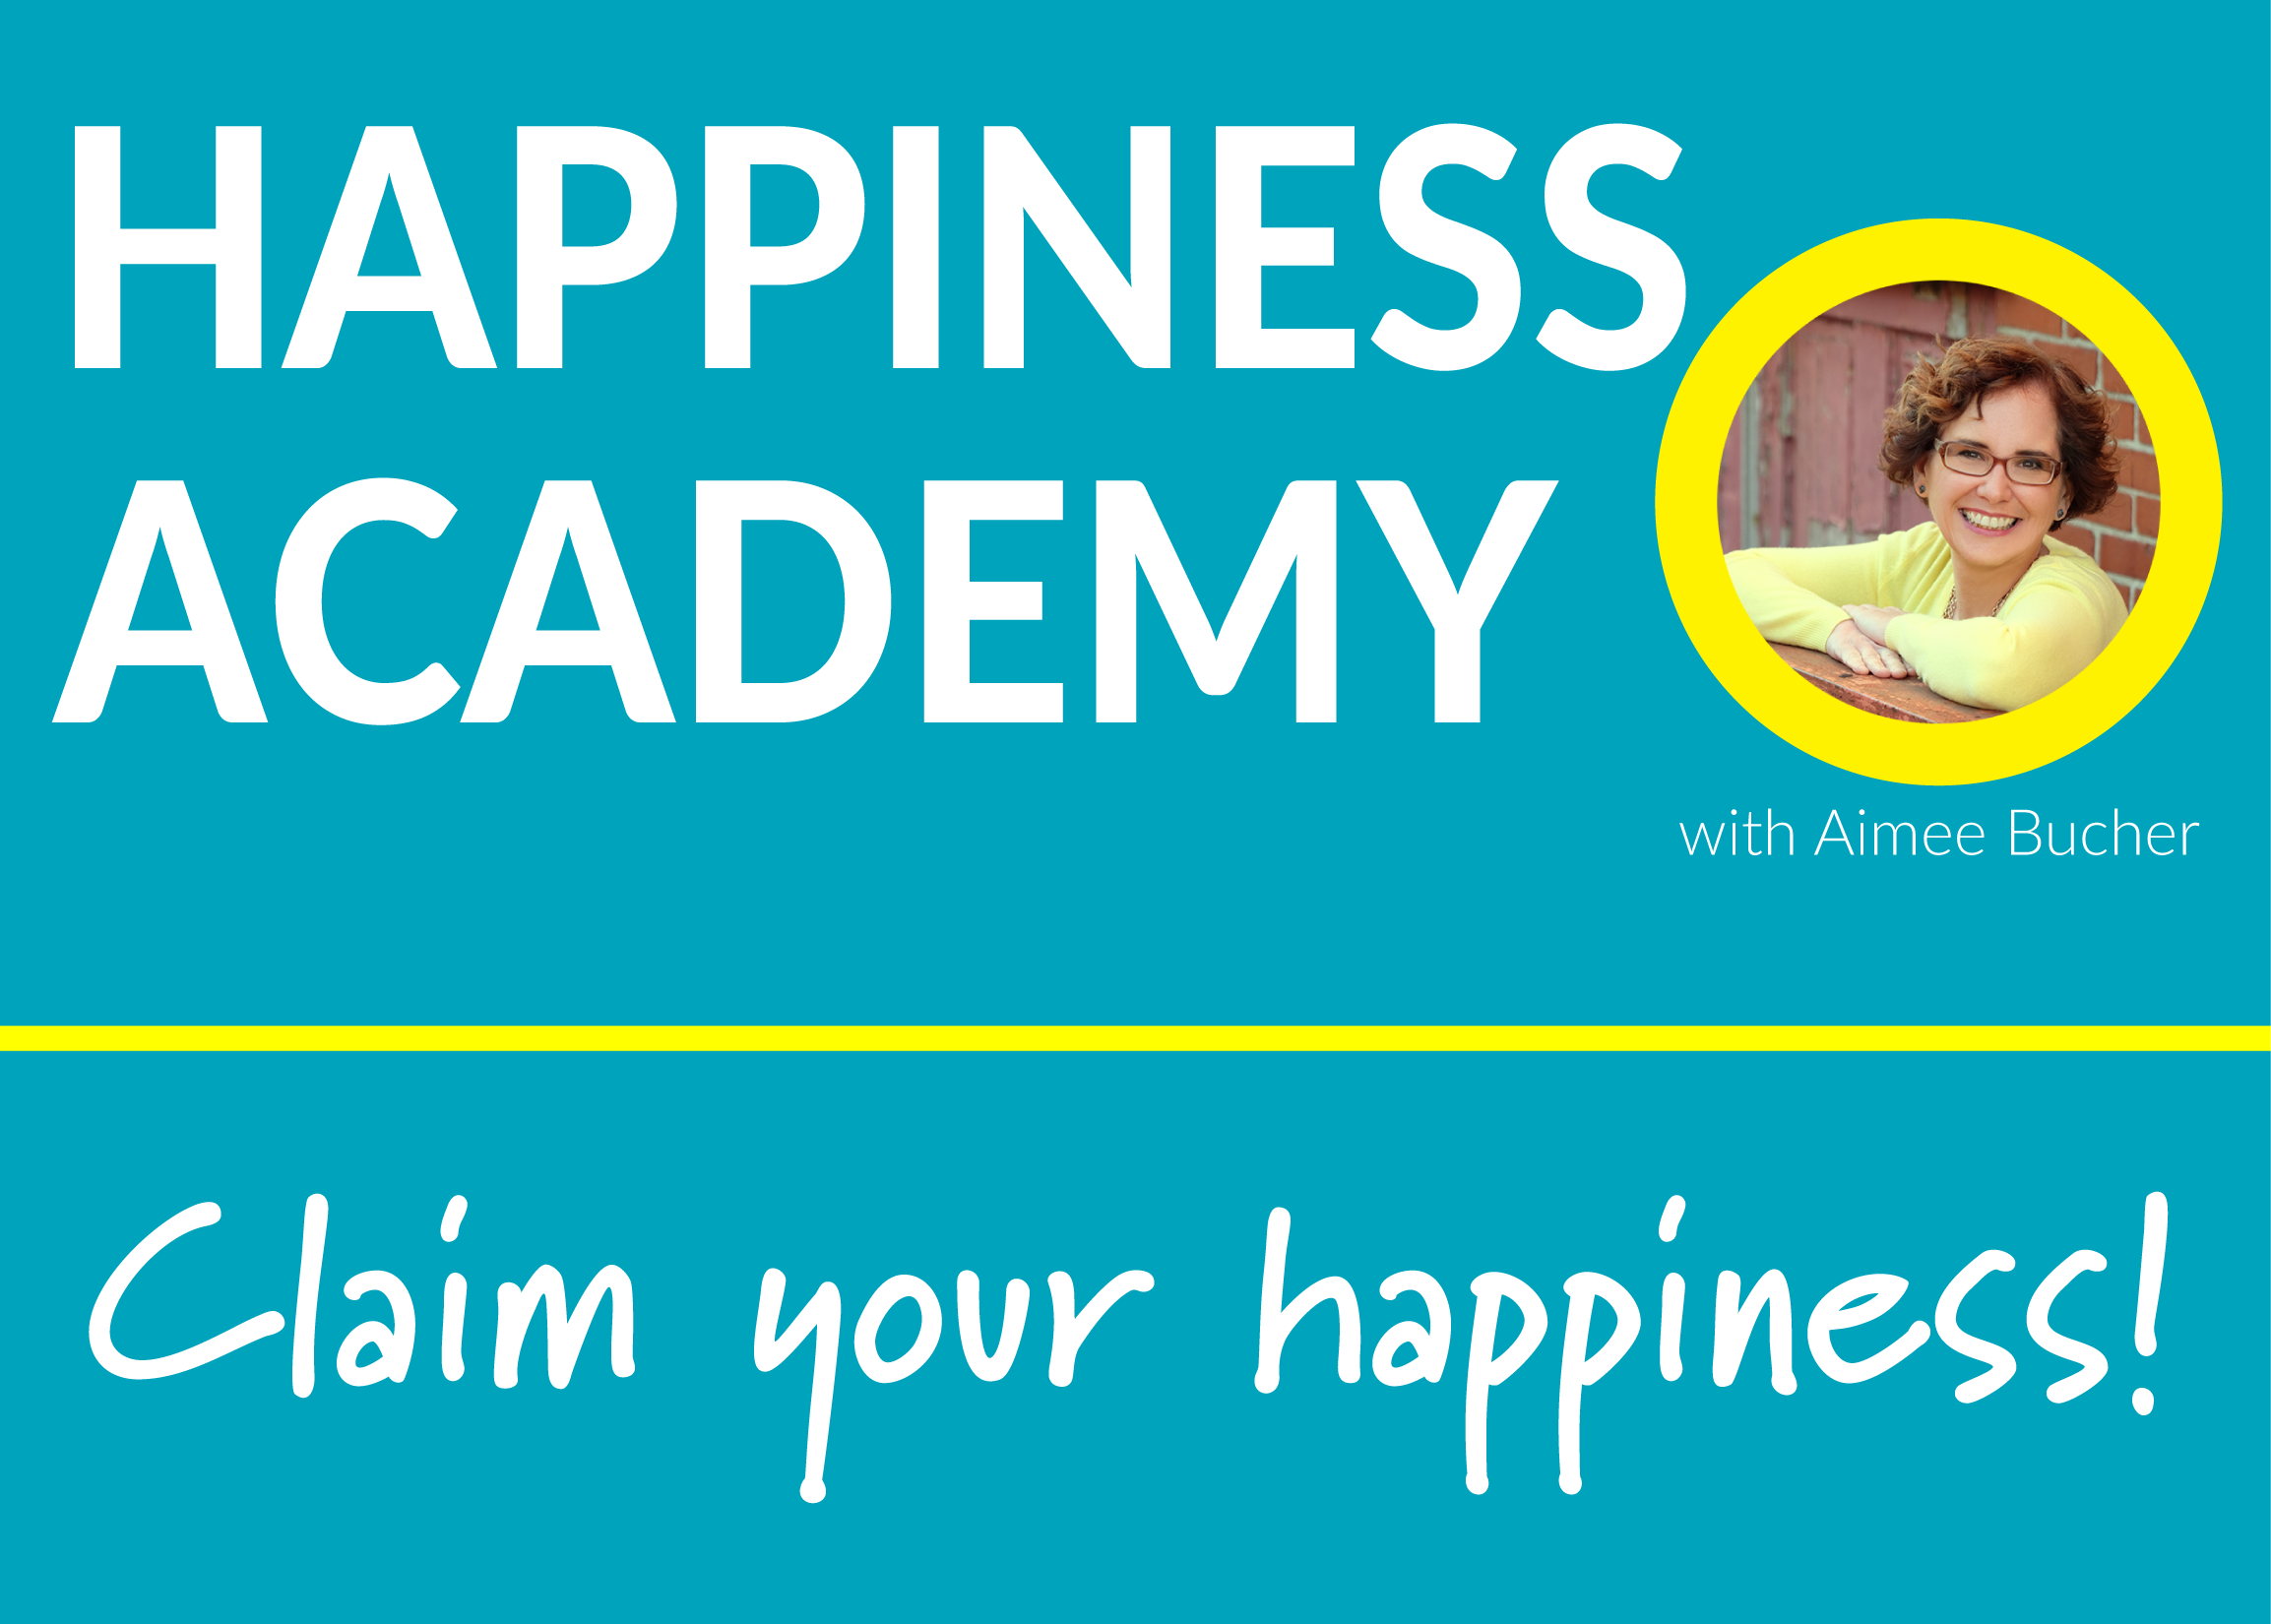 The Happiness Academy with Aimee Bucher